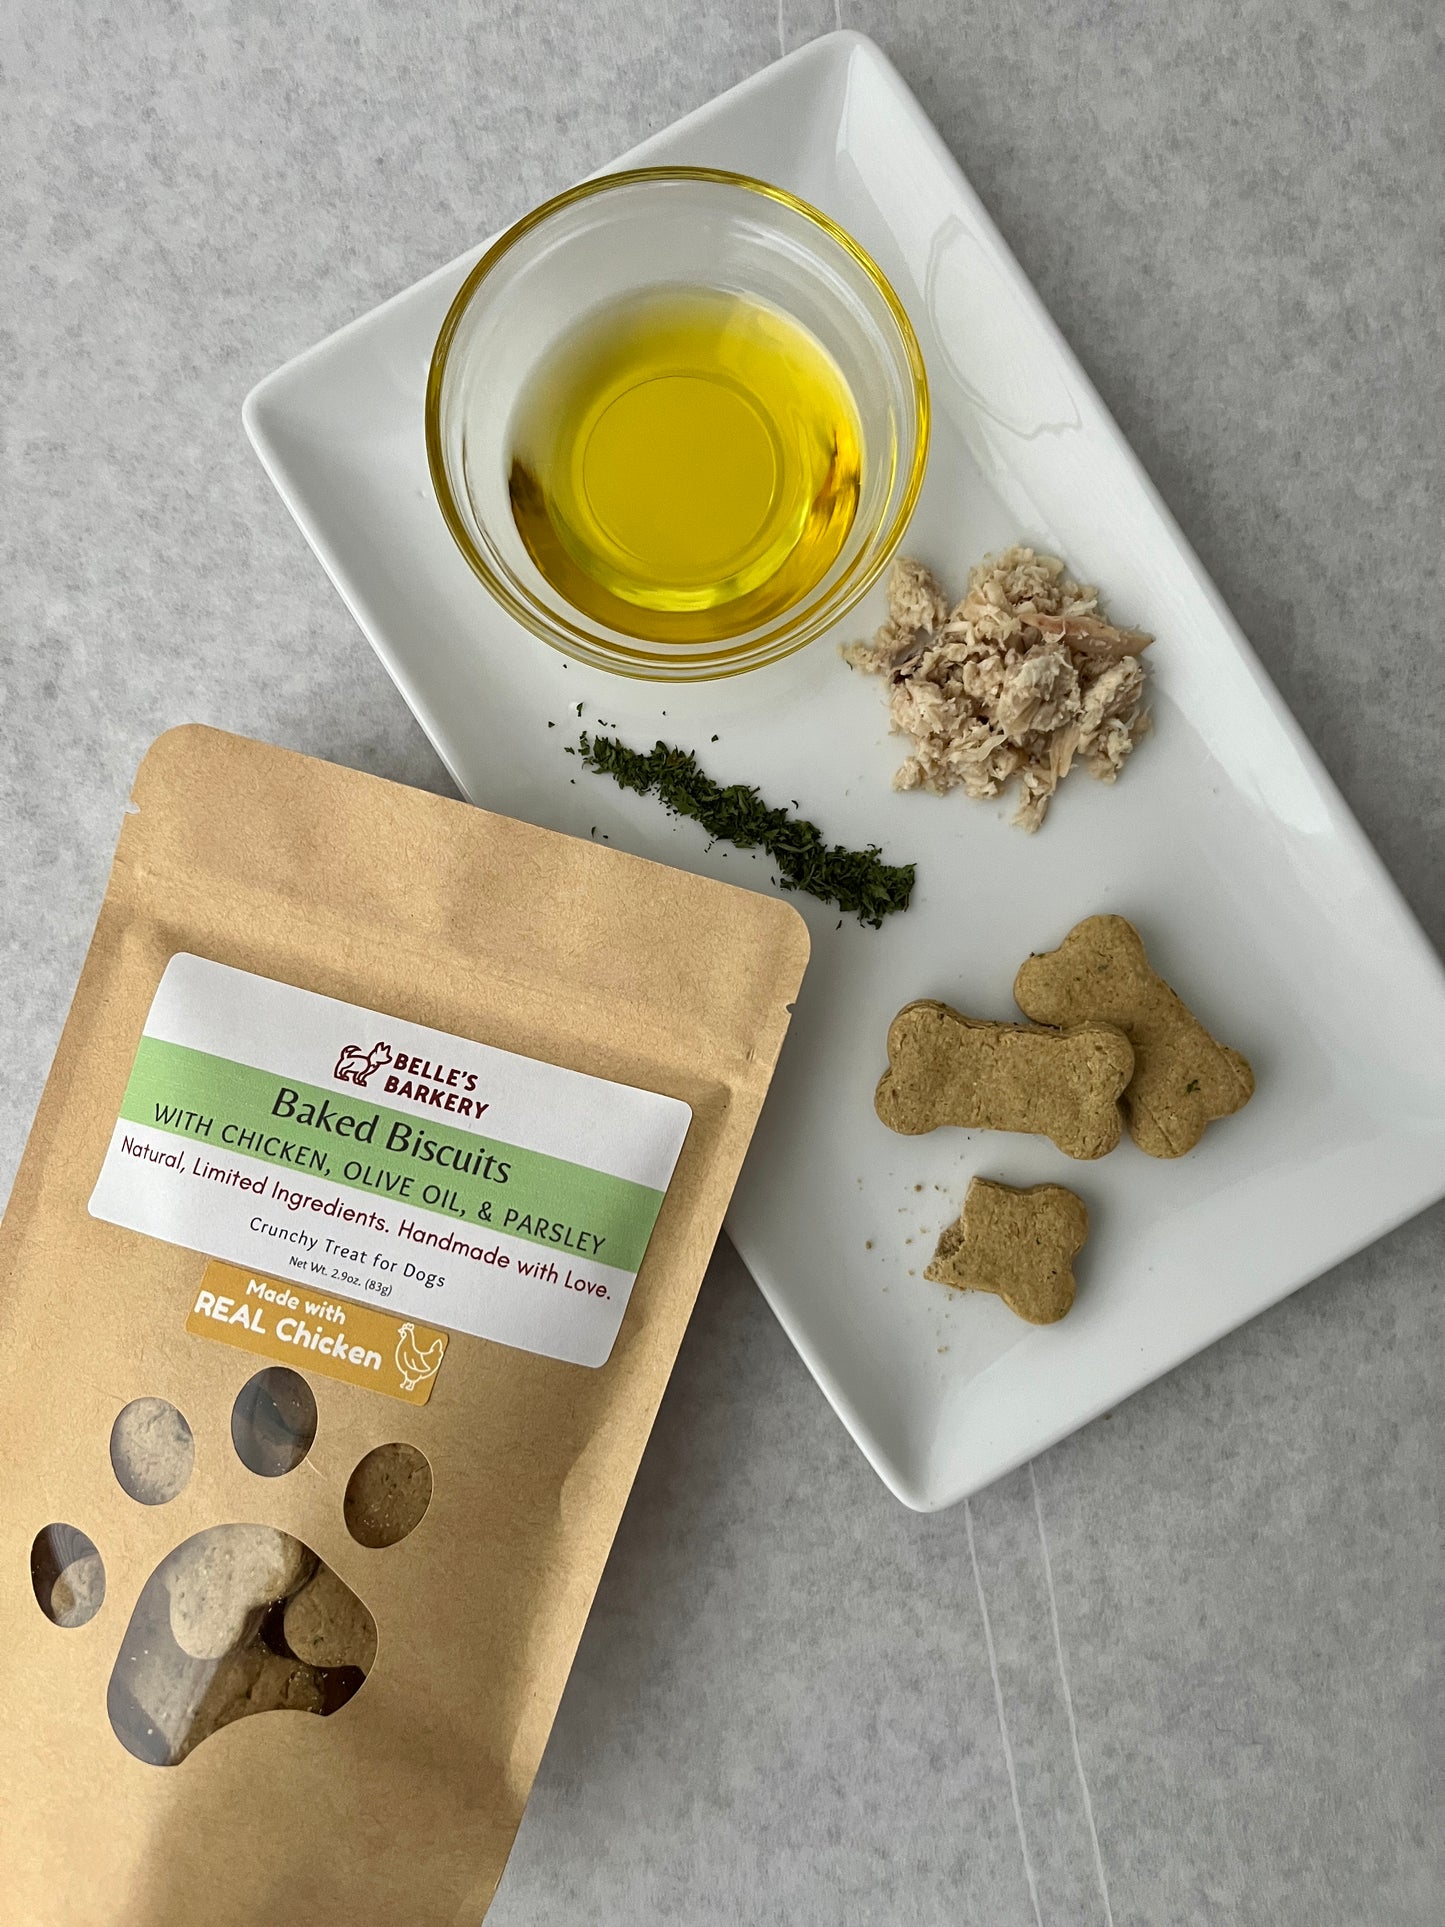 Baked Dog Biscuits with Chicken, Olive Oil, & Parsley